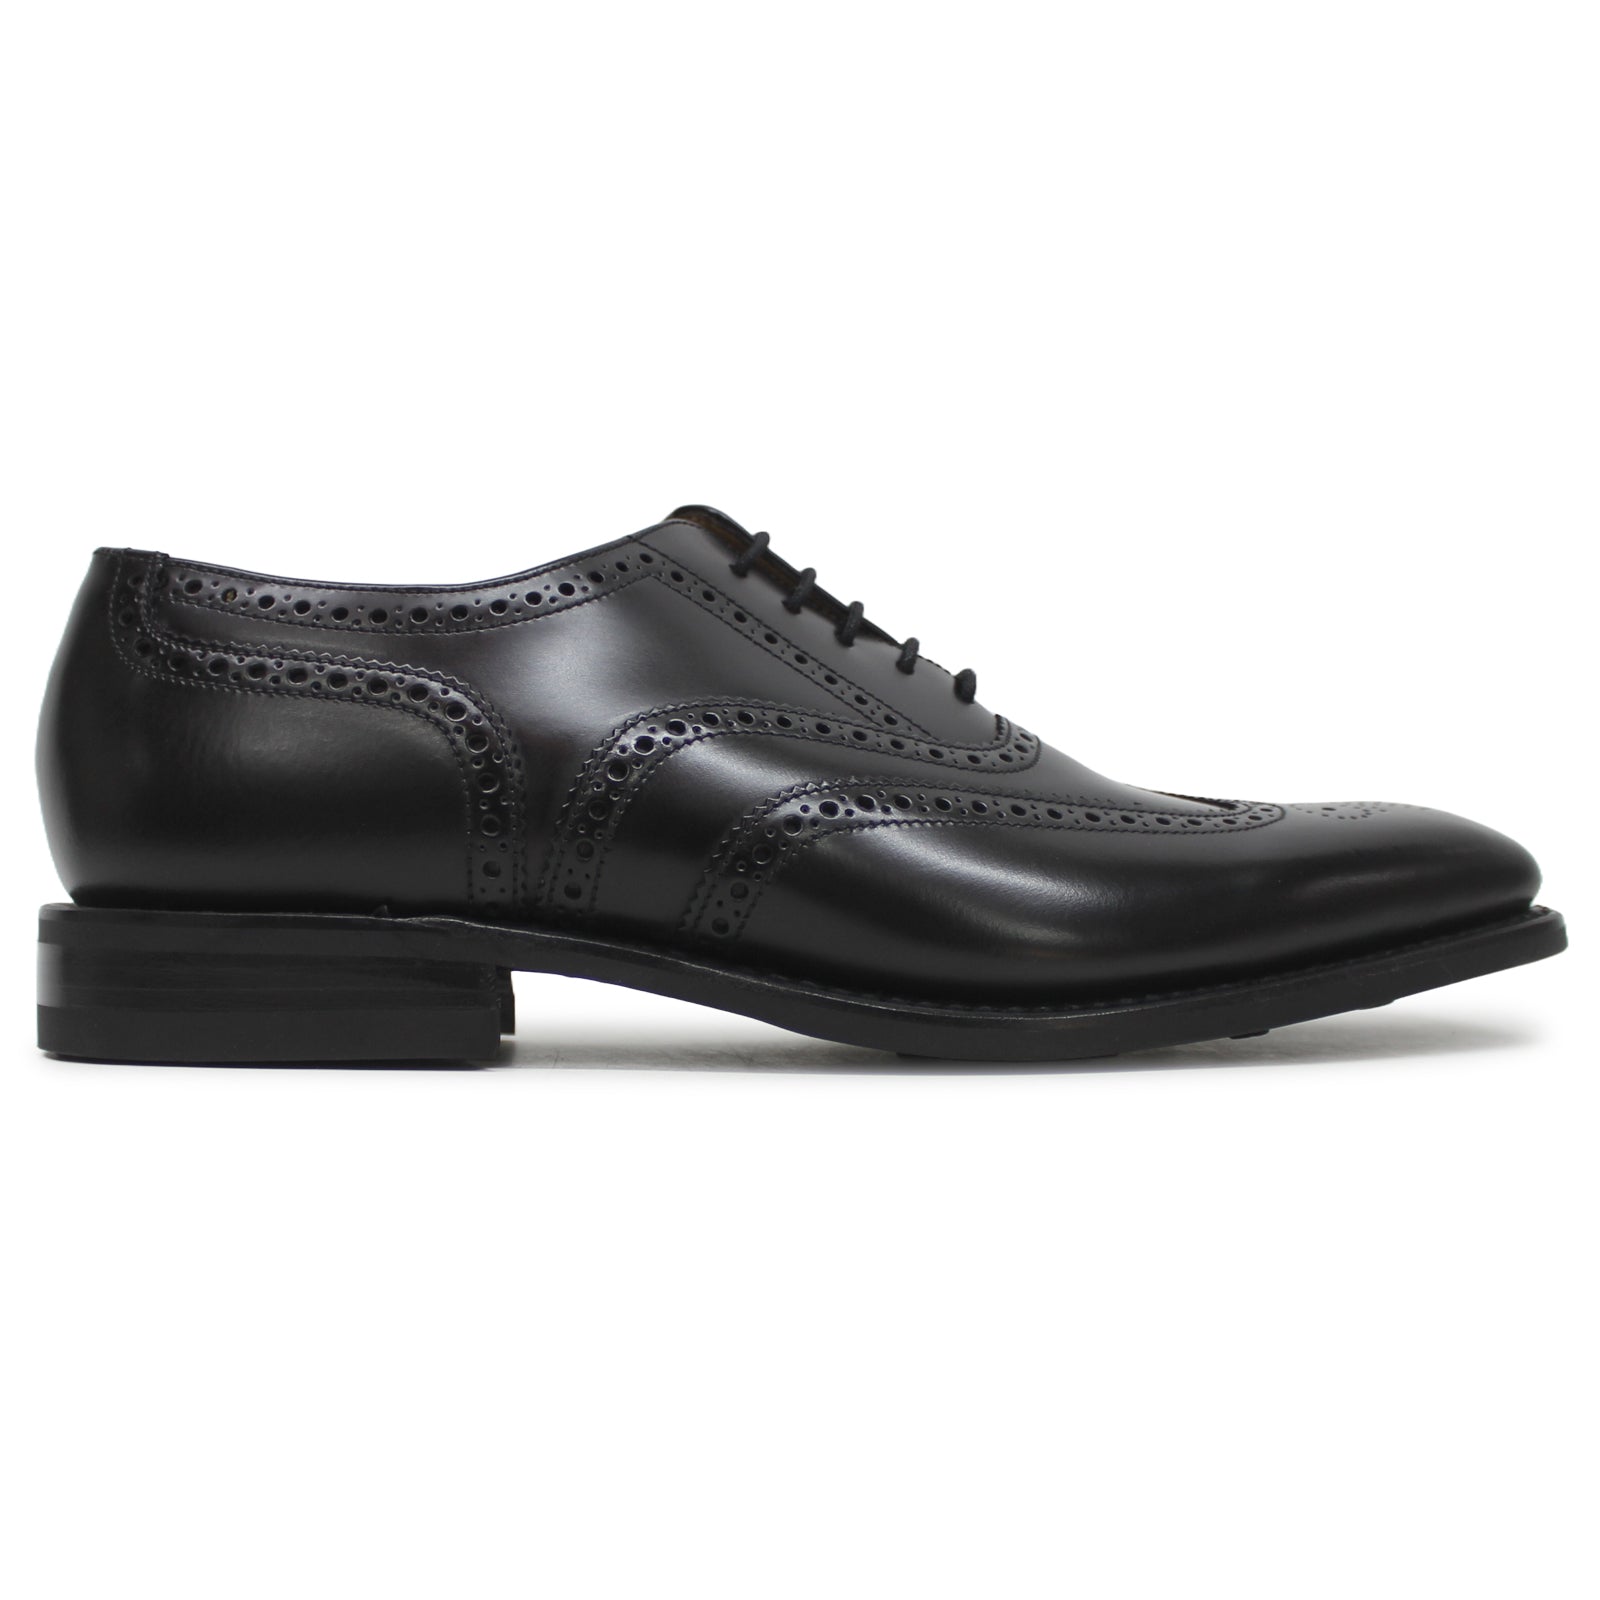 Loake Mens Shoes 262 Full Brogue Formal Oxford Lace-Up Leather - UK 9.5